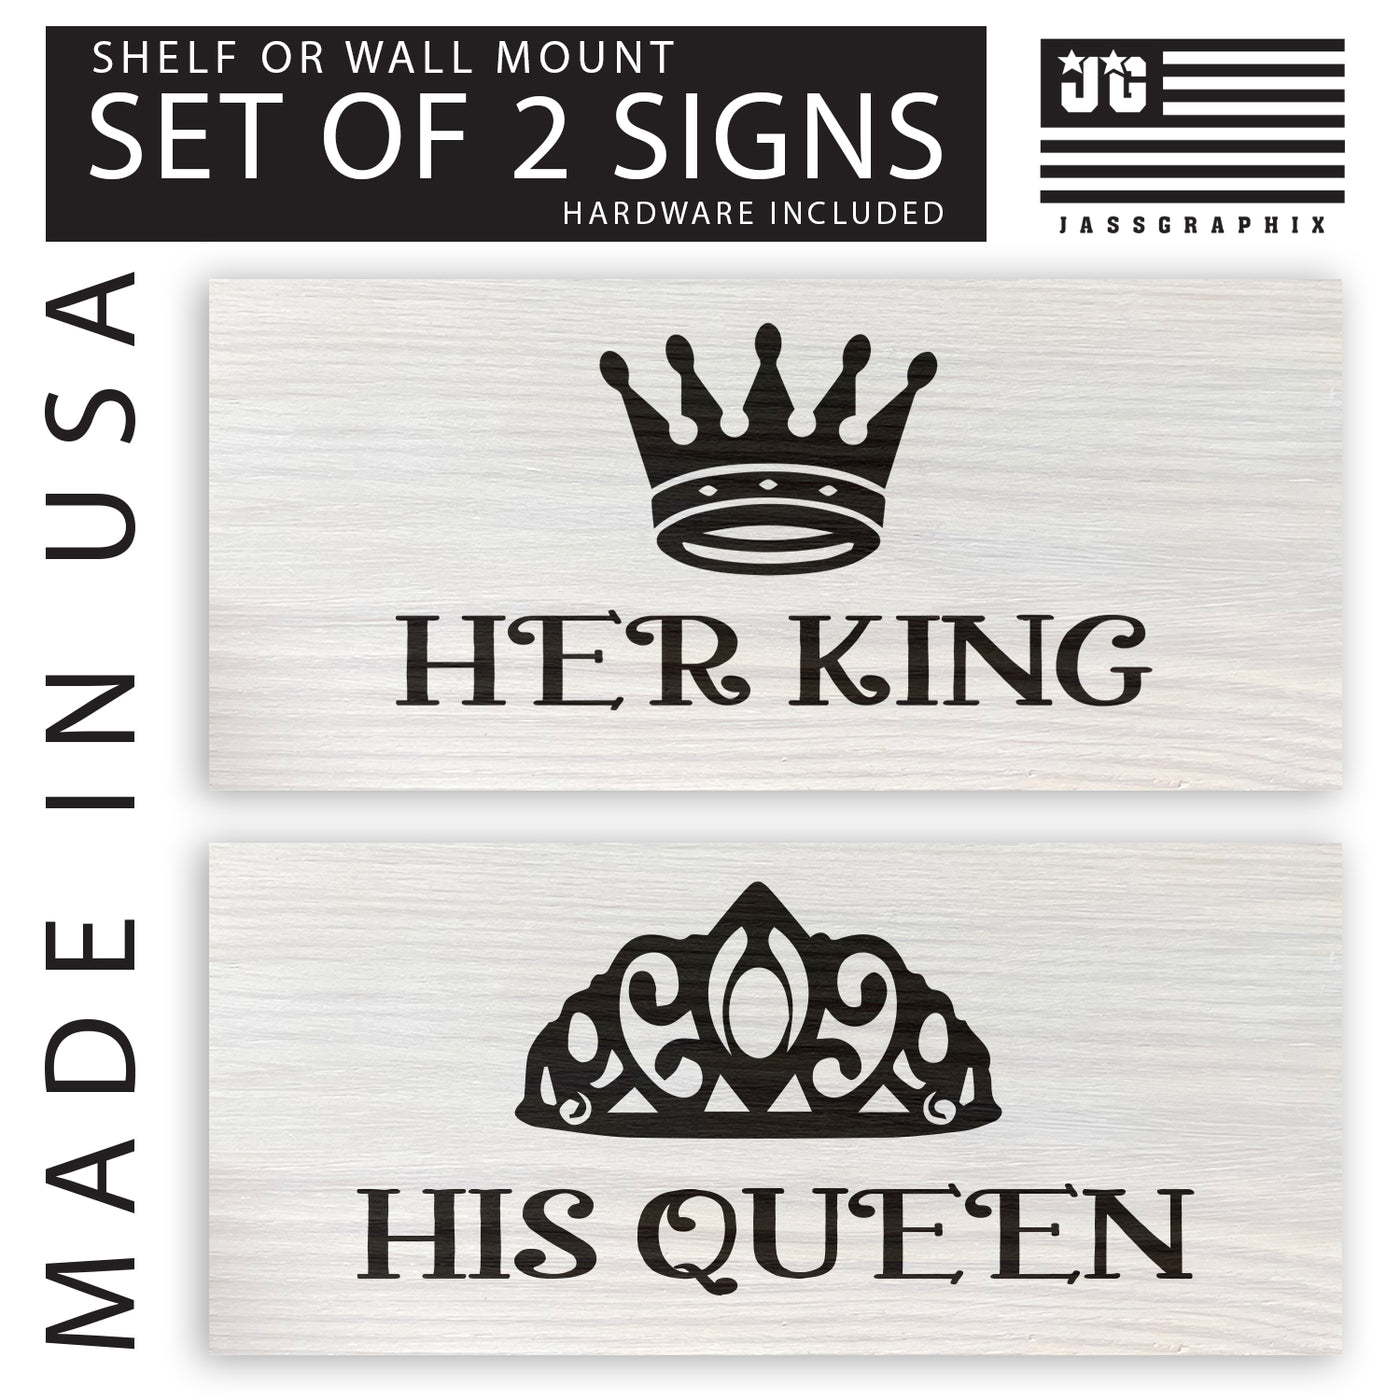 Her King and His Queen two sign graphic